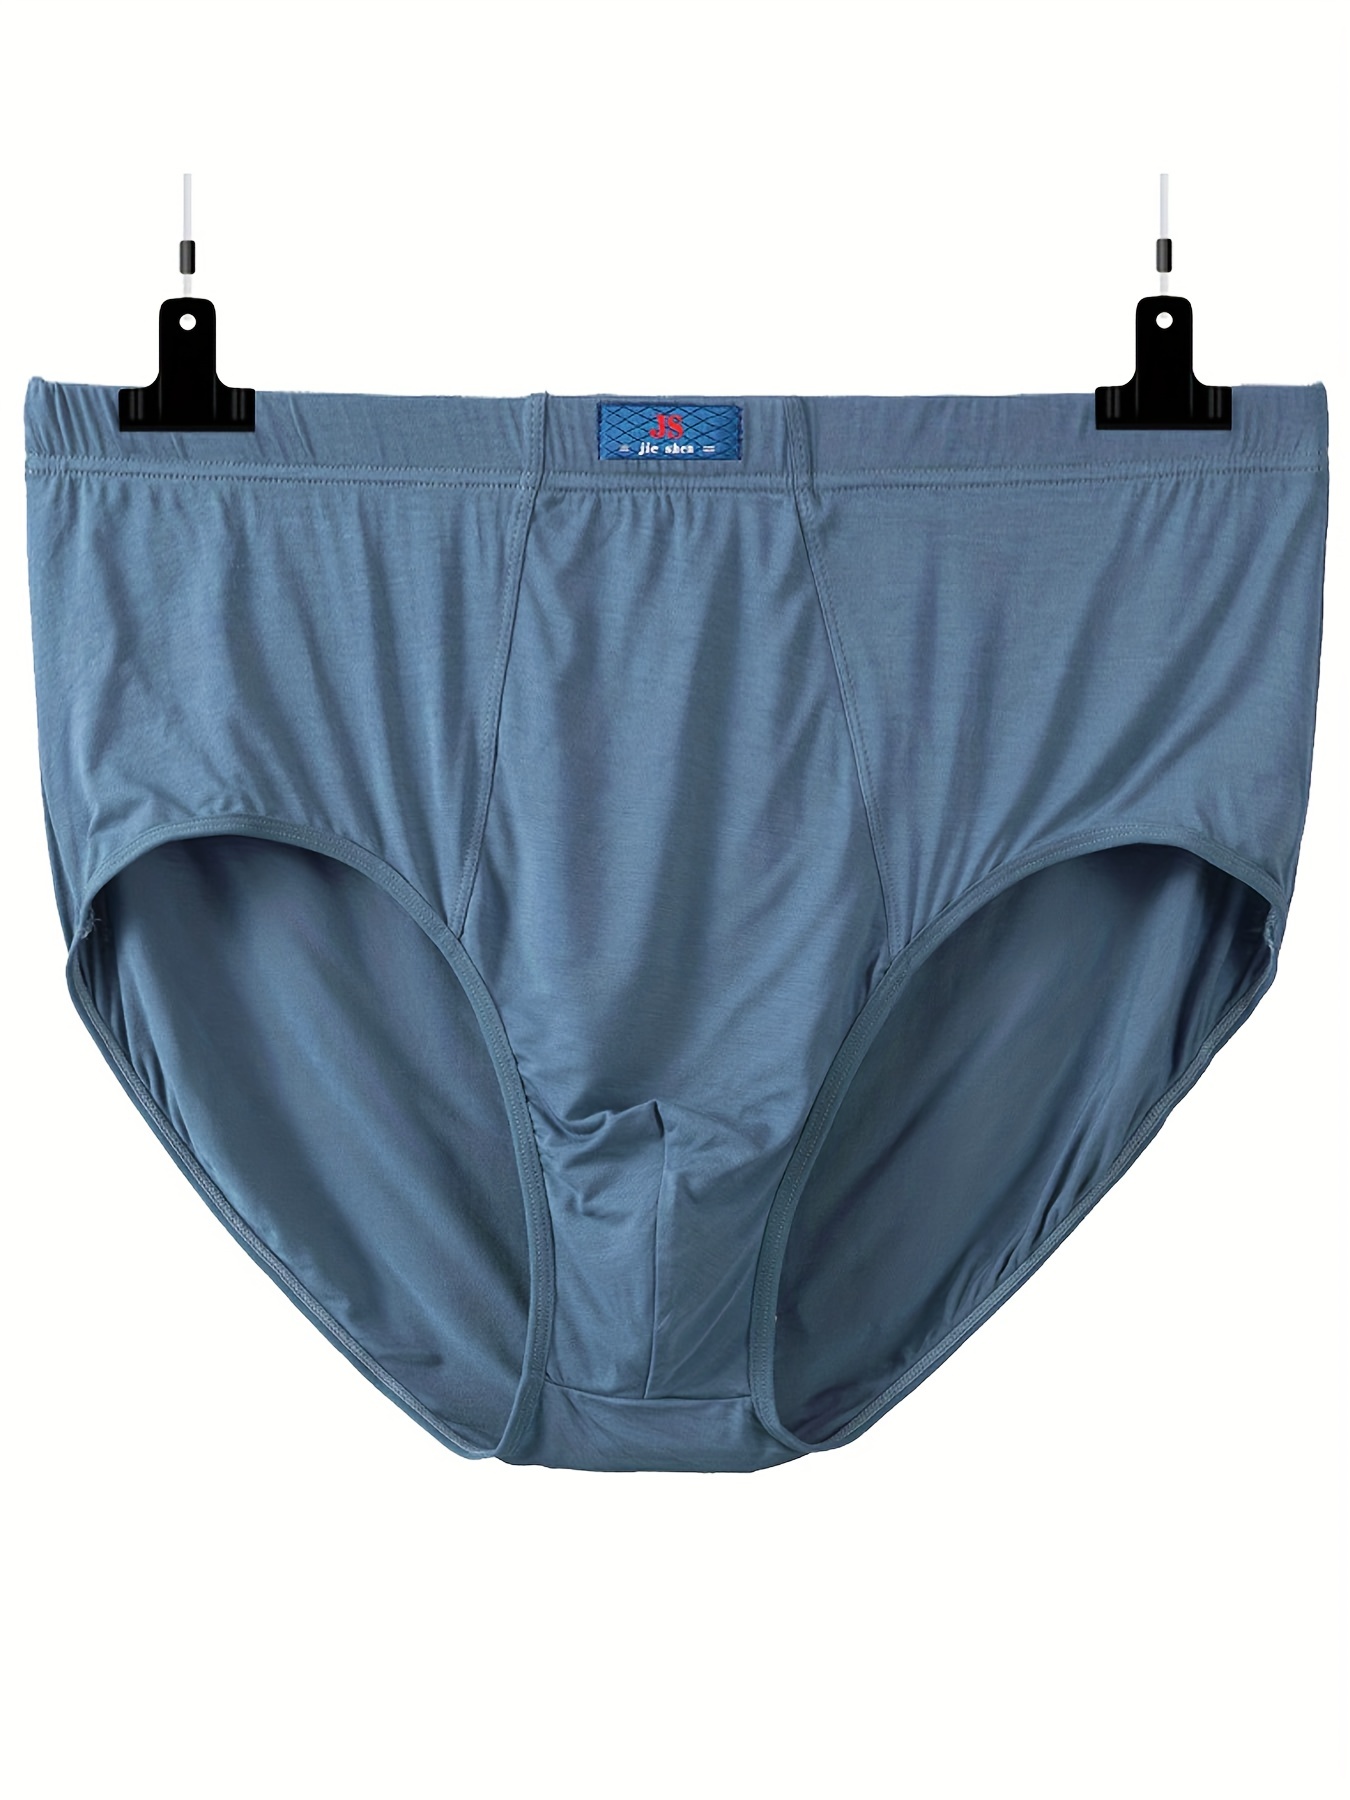 Modal Plain Antimicrobial Underwear Trunk For Men, Length: Mid Way